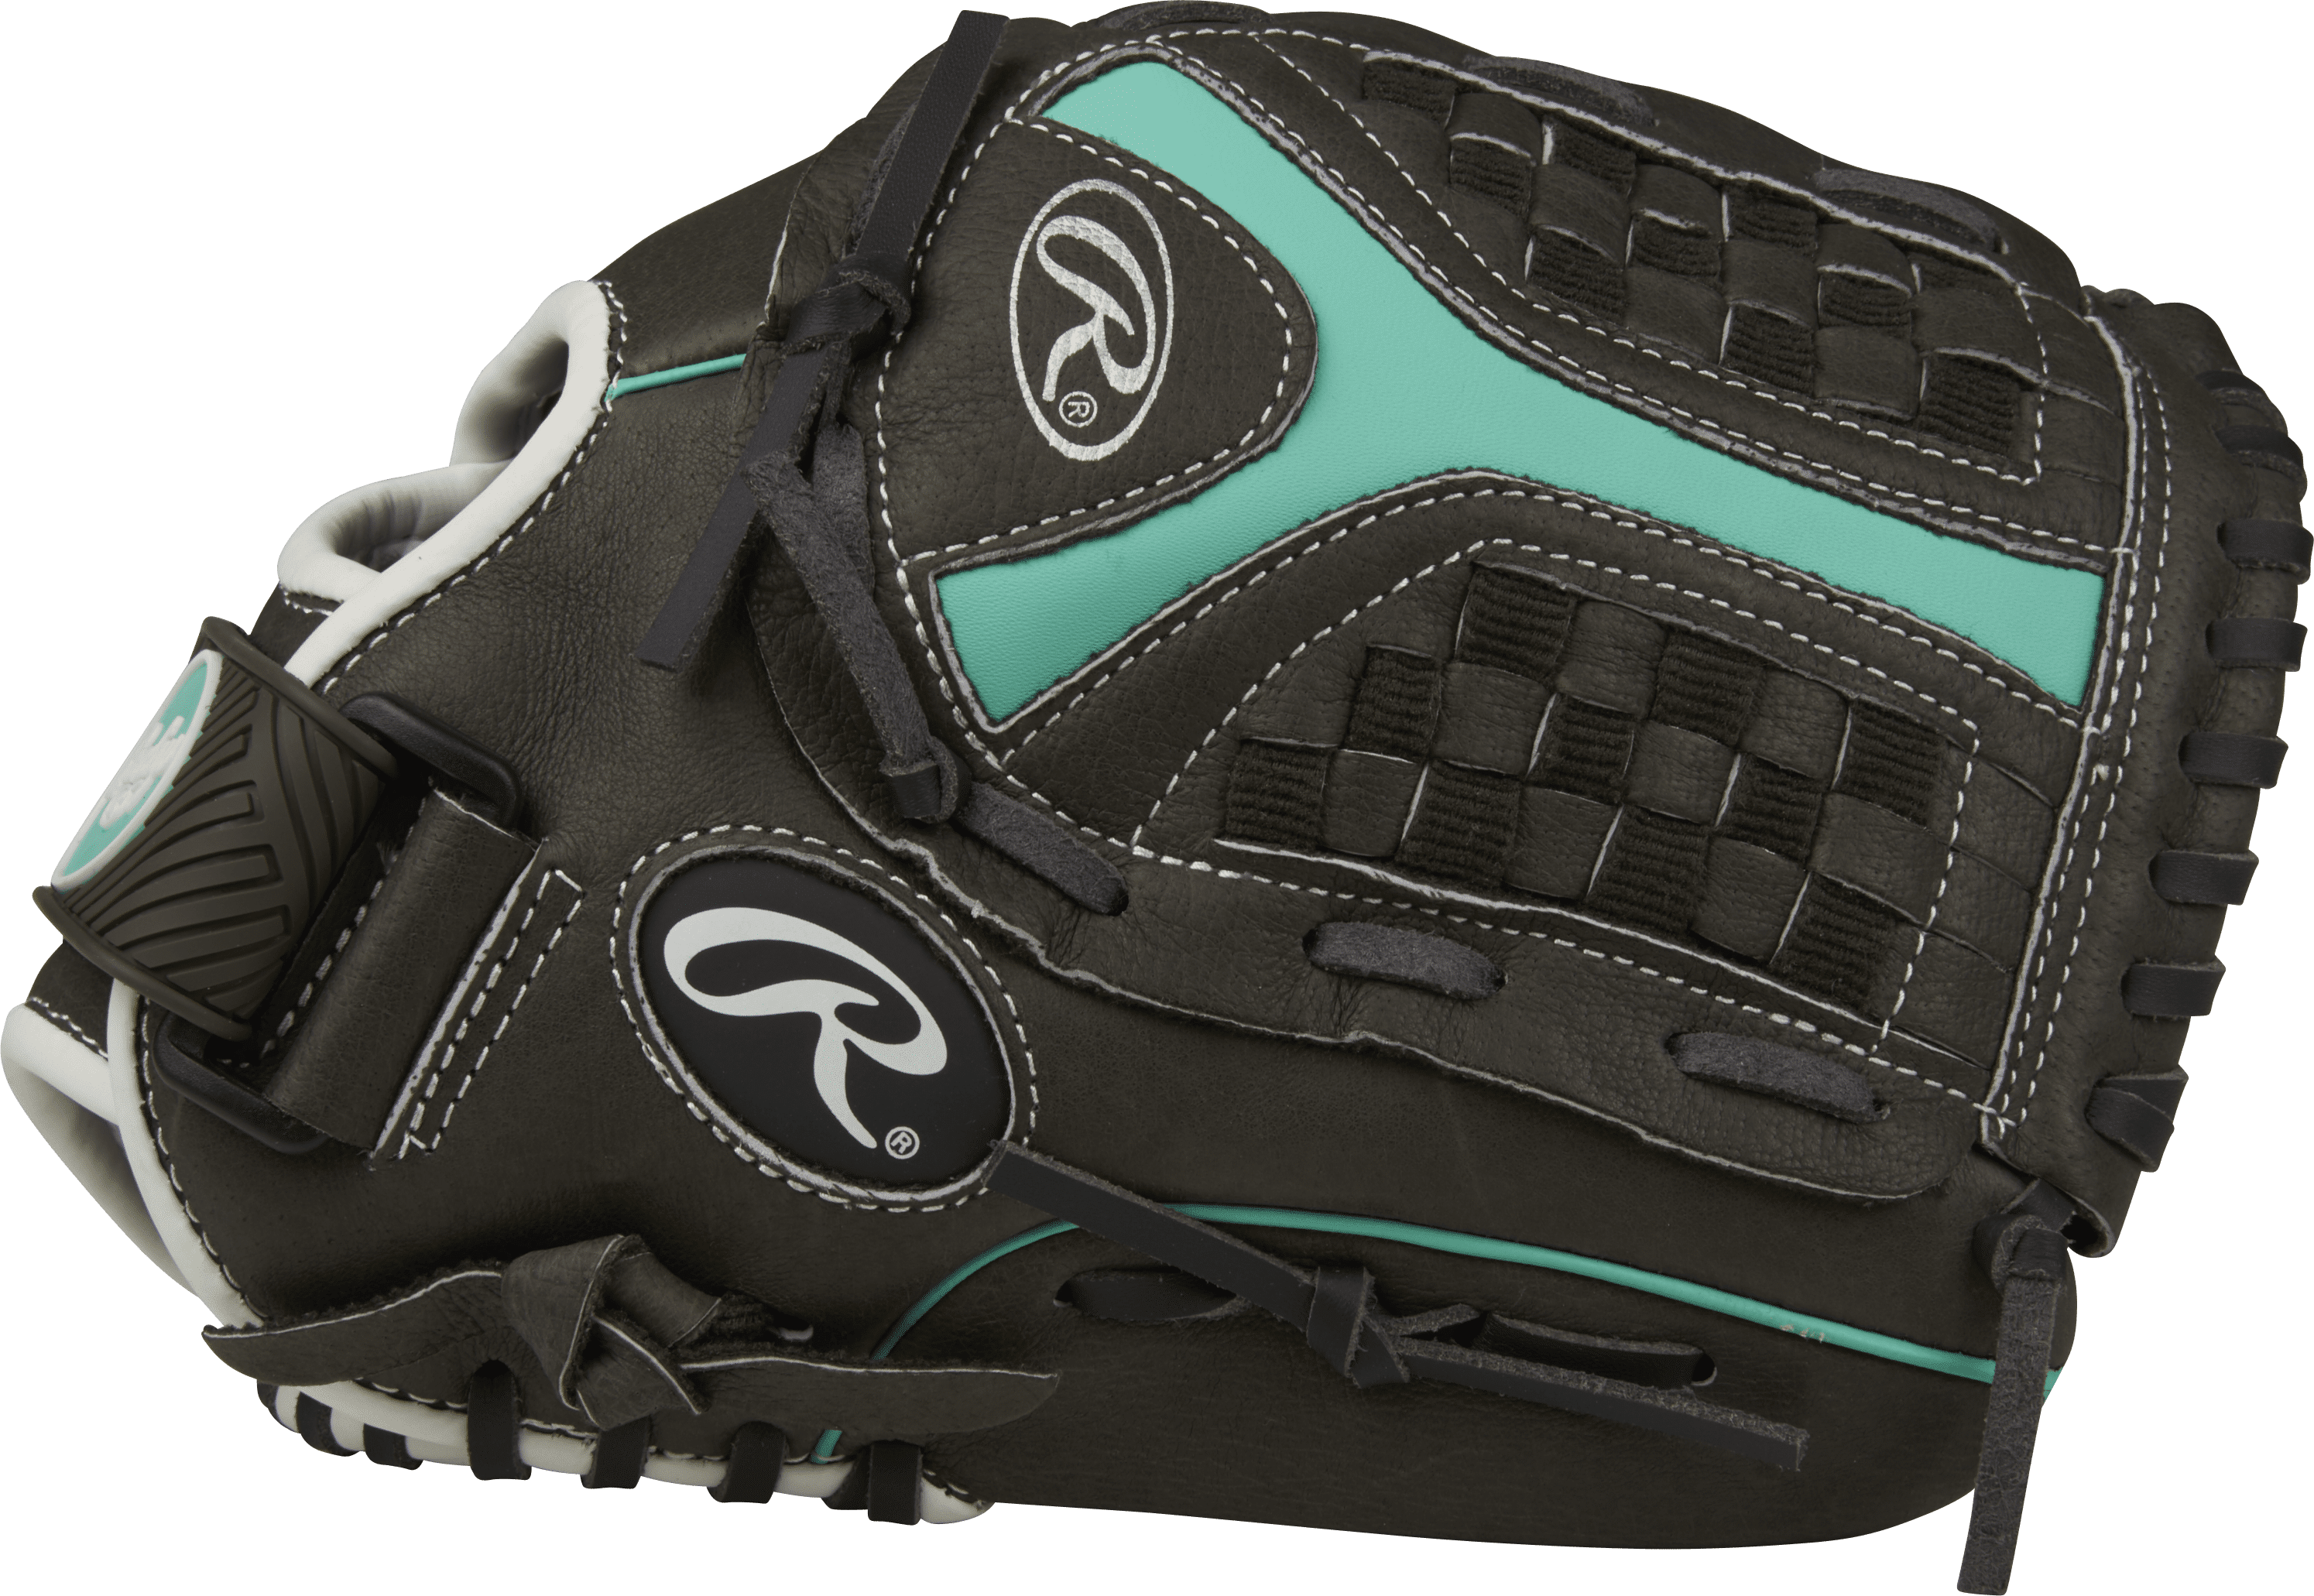 Rawlings Storm Youth Series Softball Gloves